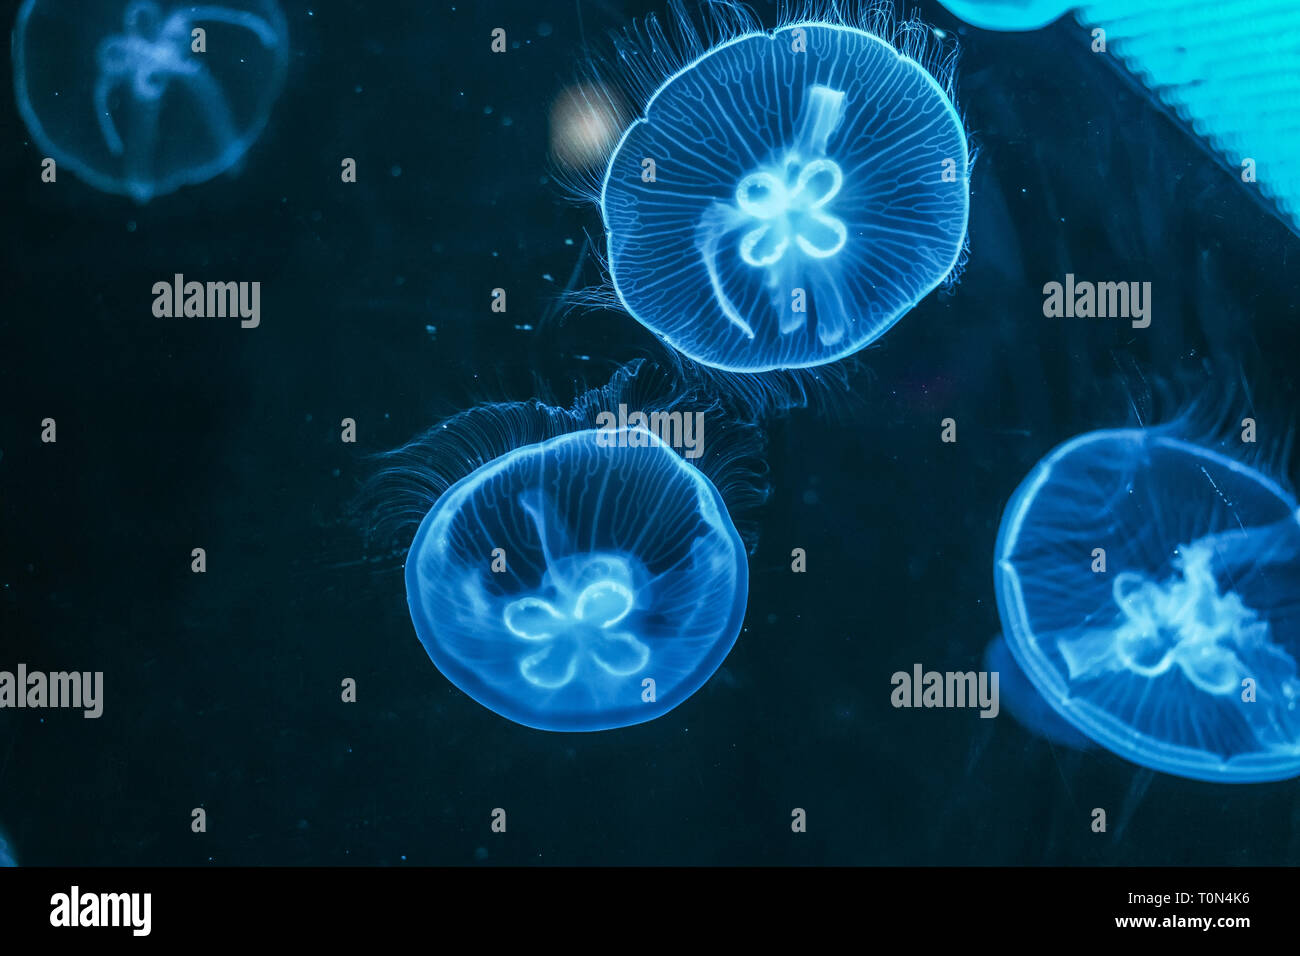 Glowing jellyfish close-up in the aquarium blue color. Stock Photo